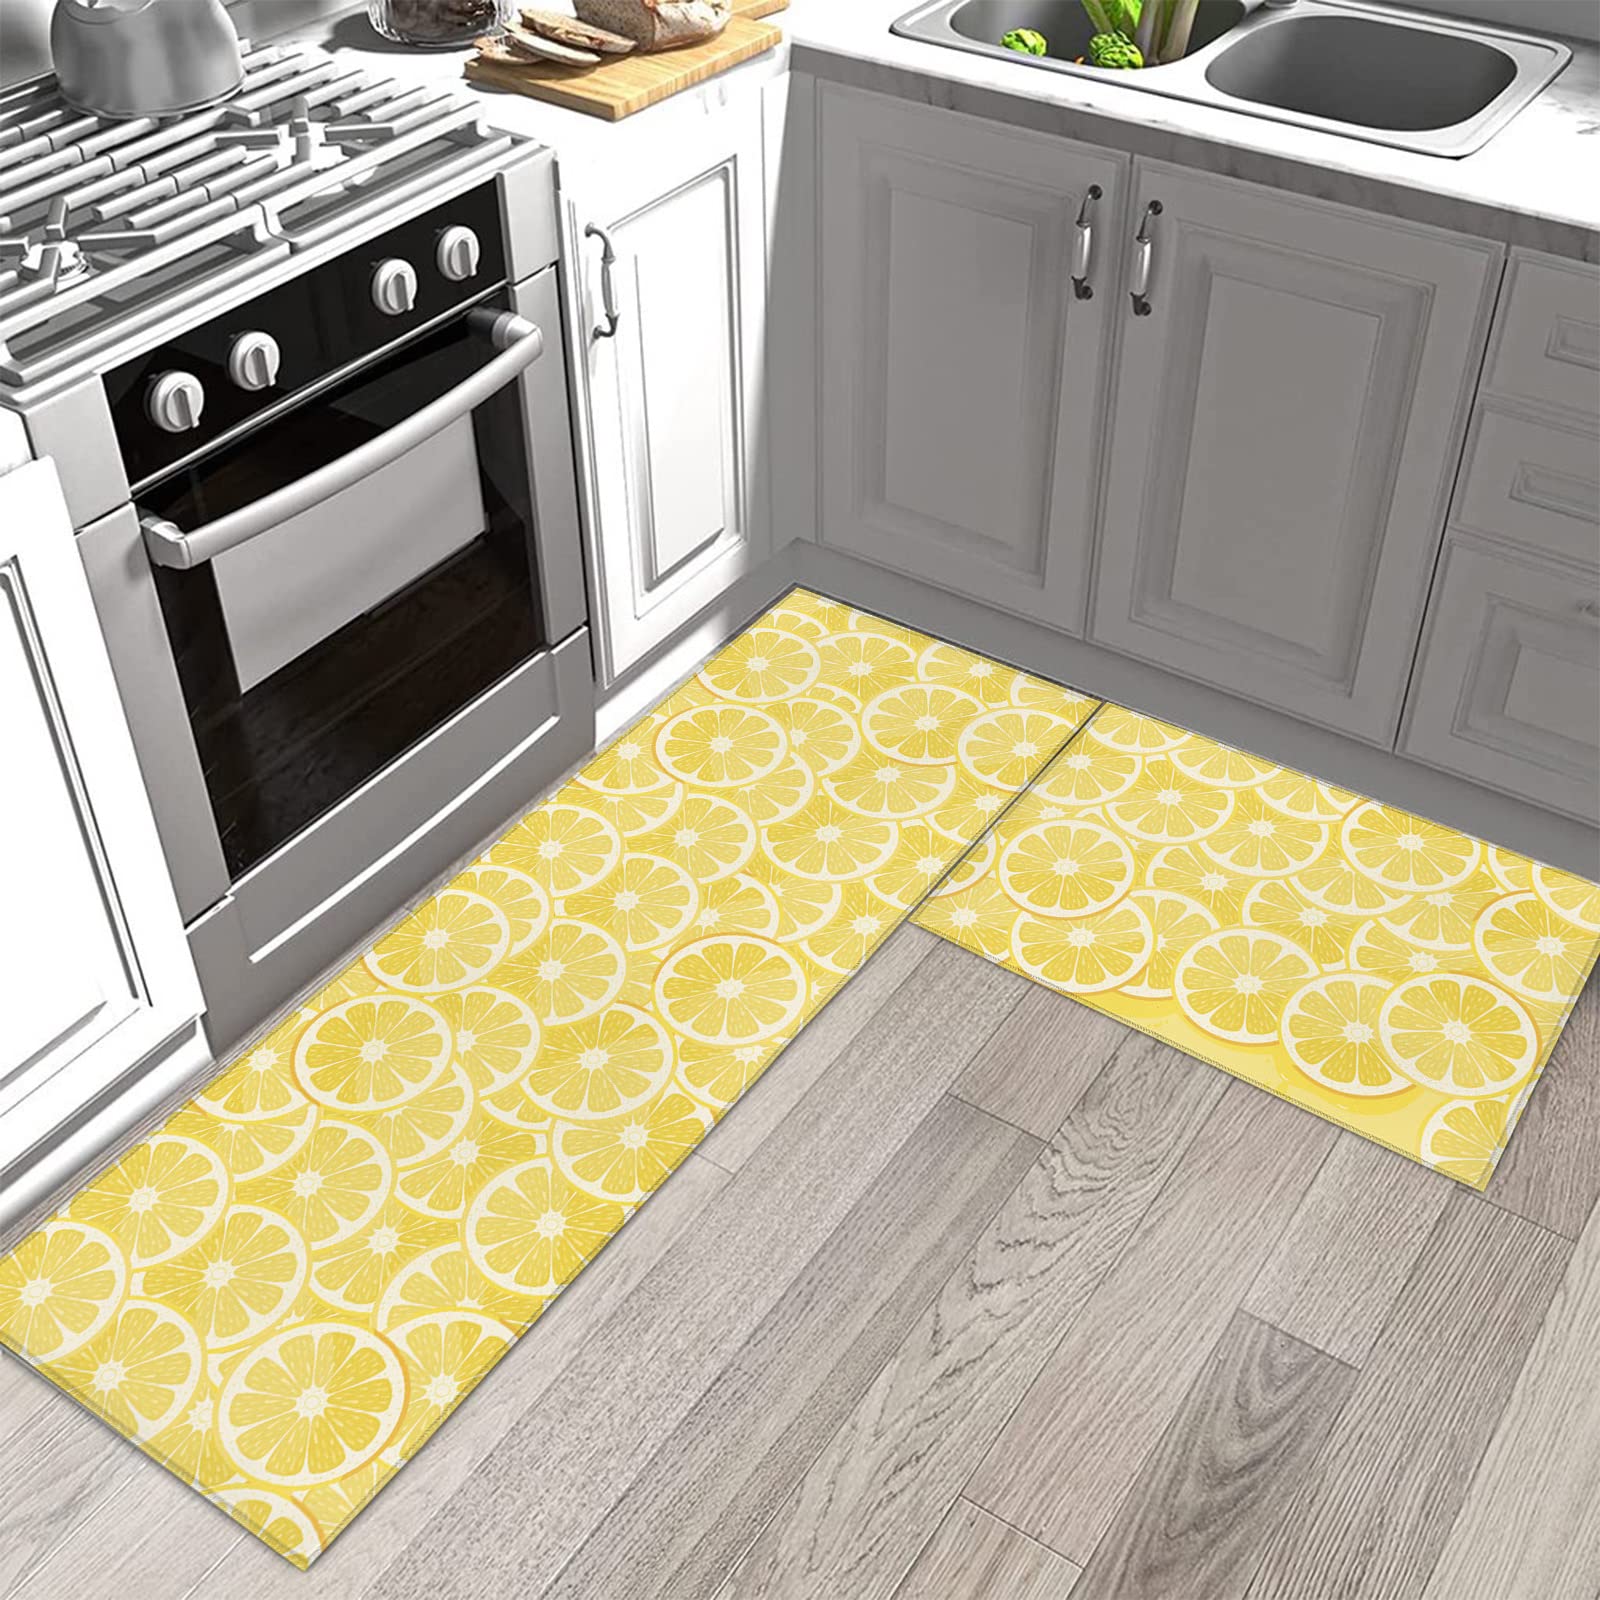 Cute Lemon Yellow Kitchen Rug and Runner Sets 2 Piece Non-Slip Bath Mats and Rugs Spring Summer Fruit Decorative Area Runners Rubber Backing Carpets Floor Sink Doormat